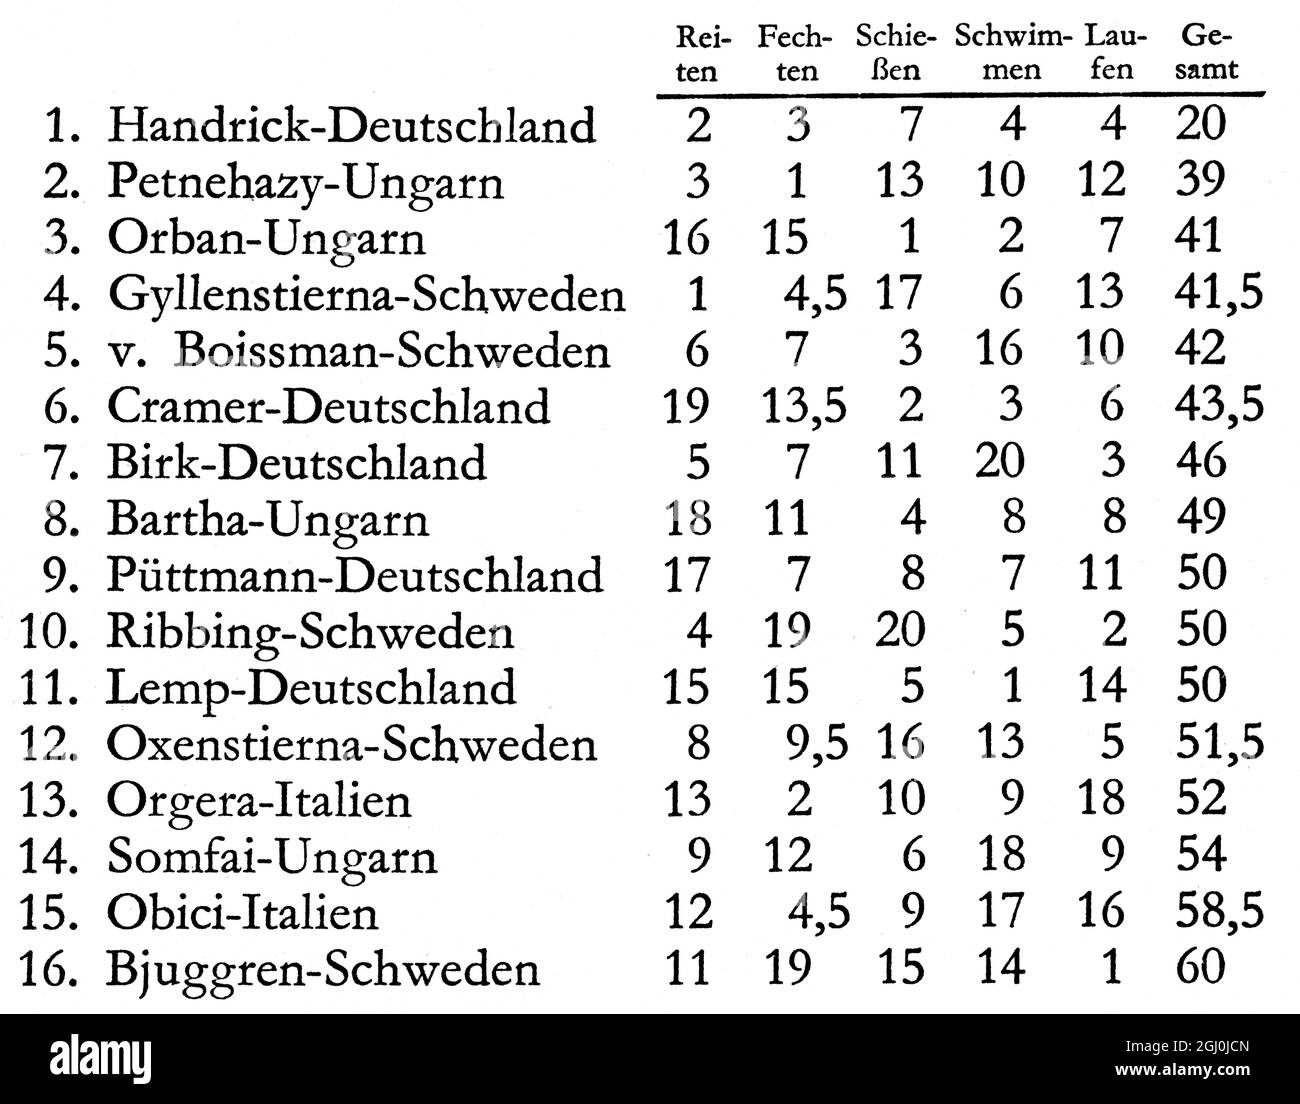 1936 Olympics results sheet for riding, fencing, shooting, swimming, running, together with total column Handrick-Germany; Pernehazy-Hungary; Orban-Hungary; Gyllenstierna-Sweden; v. Boissman-Sweden; Cramer-Germany; Birk-Germany; Bartha-Hungary; Puttmann-Germany; Ribbing-Sweden; Lemp-Germany; Oxenstierna-Sweden; Orgera-Italy; Somfai-Hungary; Obici-Italy; Bjuggren-Sweden ©TopFoto Stock Photo